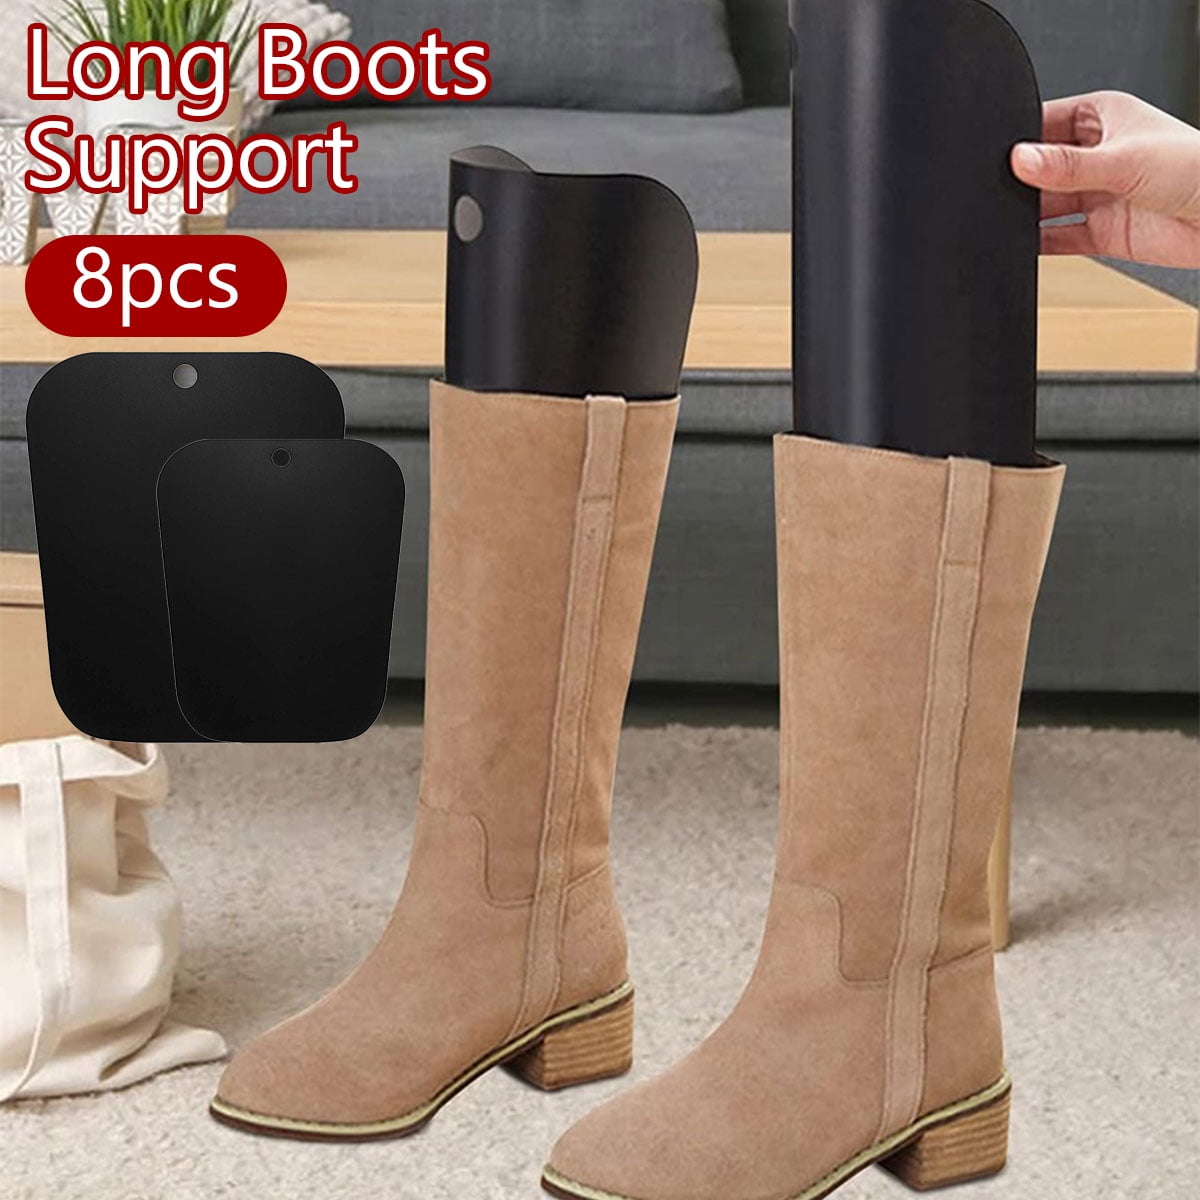 2pcs Boot Shaper For Knee Length Boots, Anti-wrinkle Long Boot Tree Long  Shoes Stretcher With Adjustable Design, 16-inch